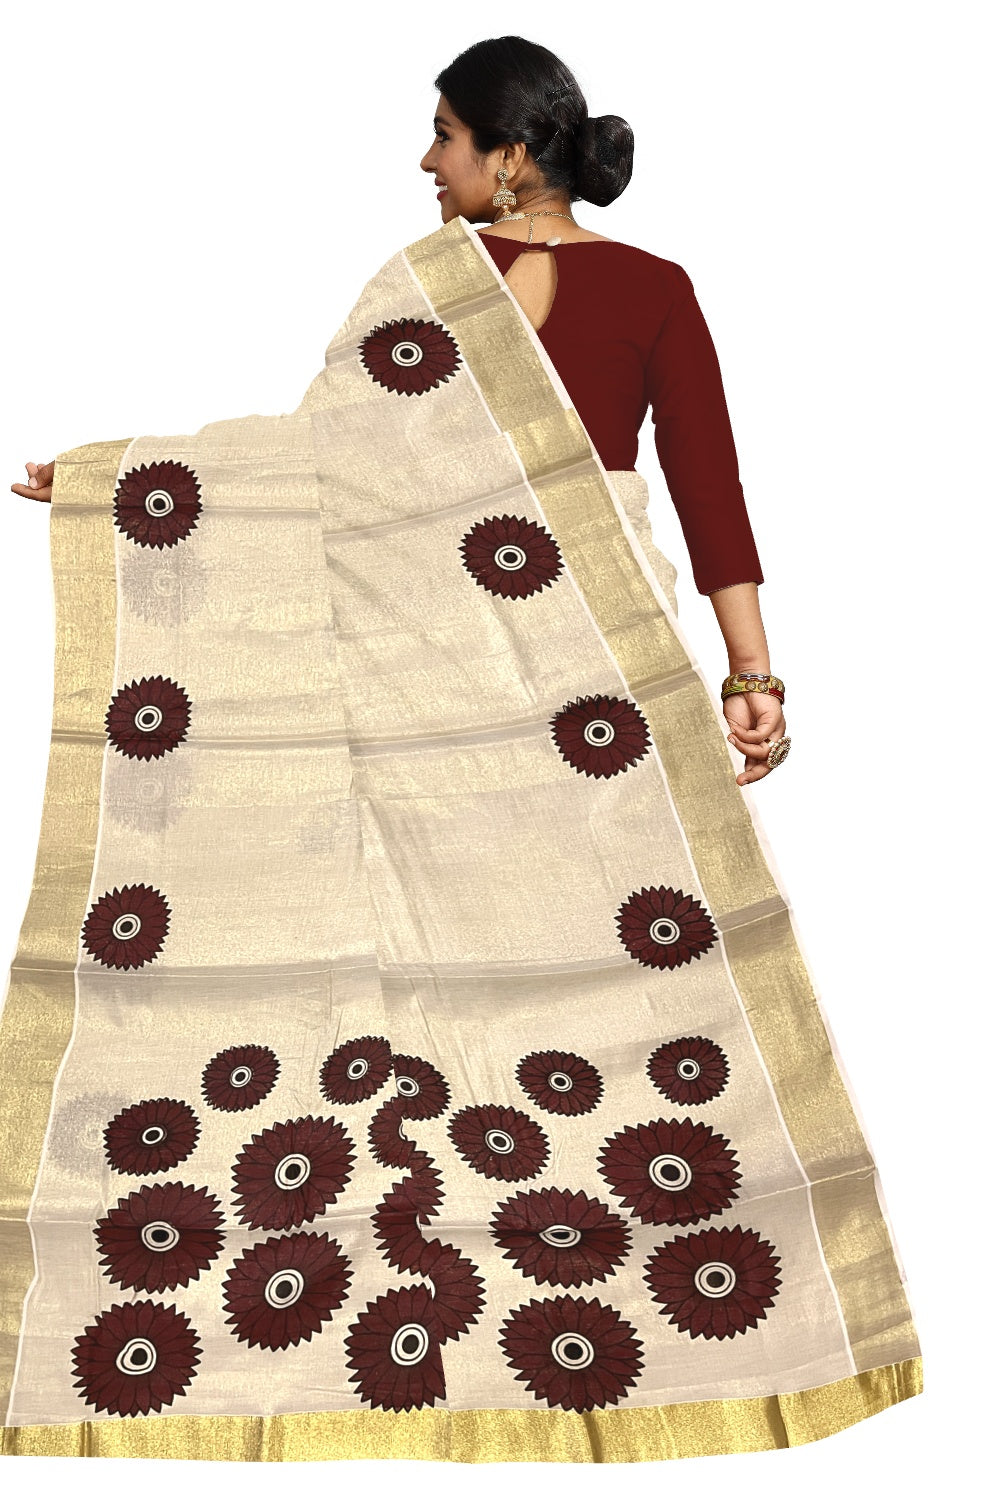 Southloom Exclusive Tissue Kasavu Saree With Maroon Sunflower Art On Body and Pallu